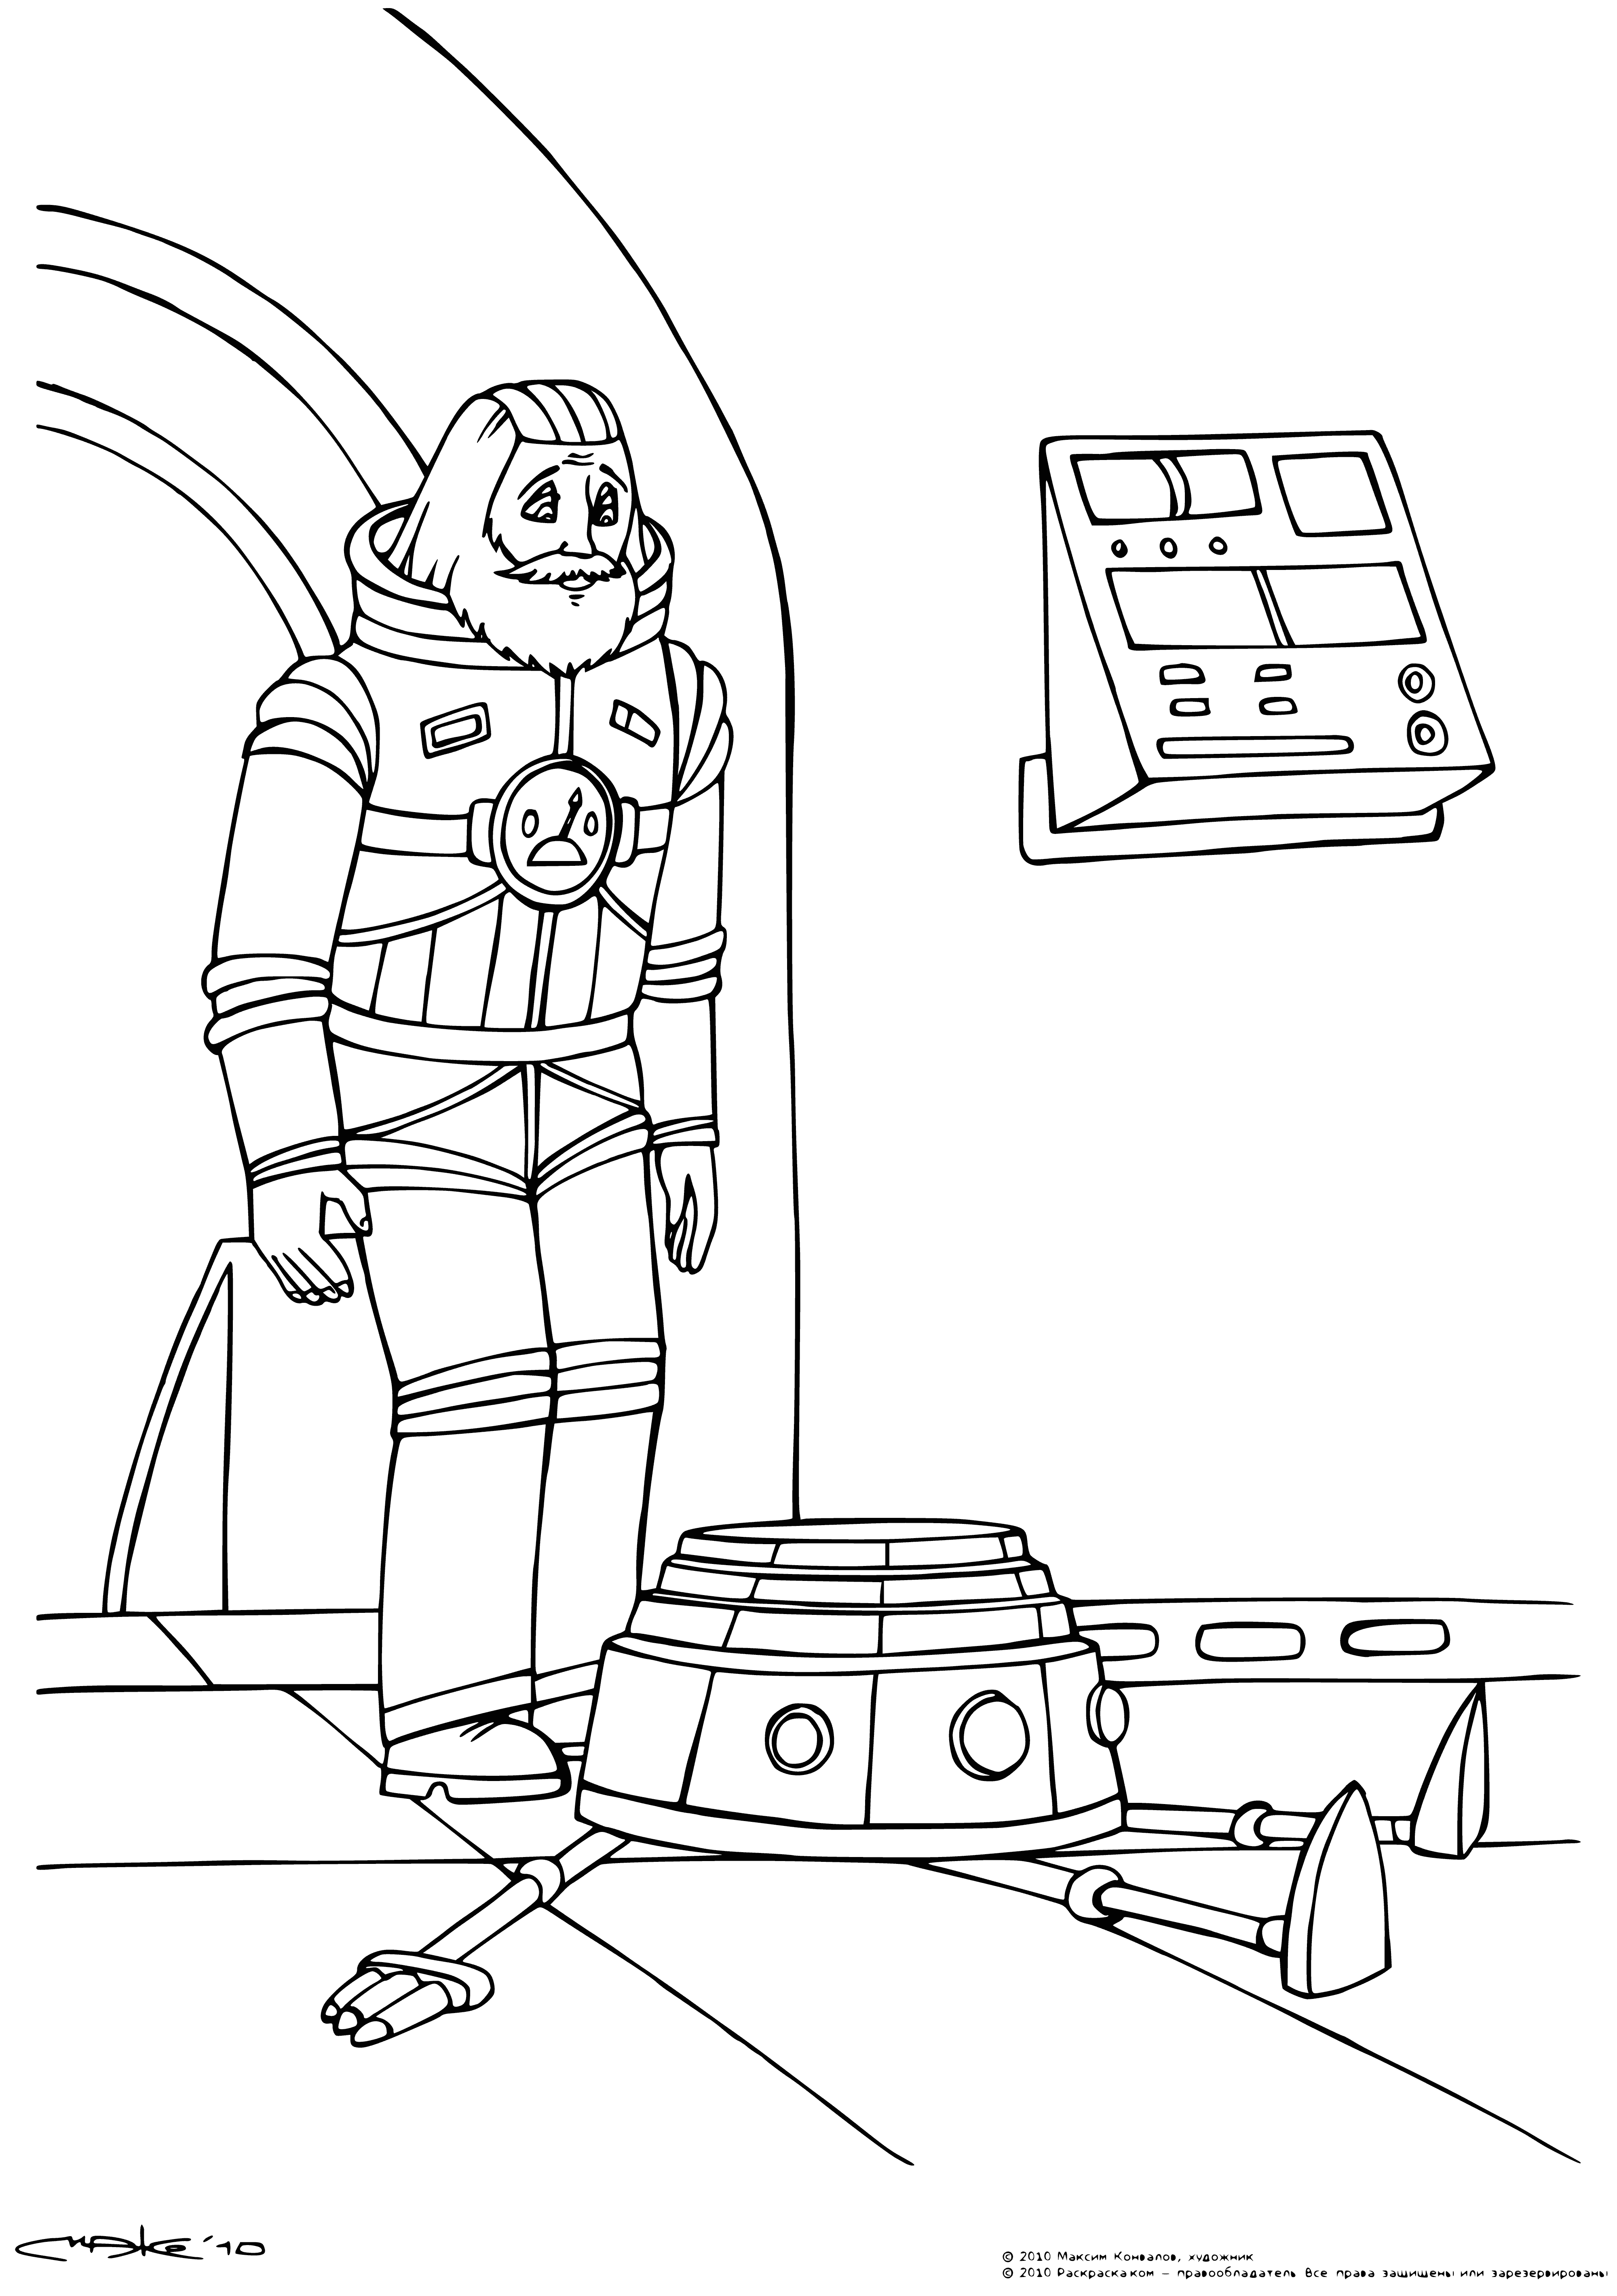 coloring page: A large, spherical object in the center w/ a white, gapless ring being infected by dark, tentacle-like objects; smaller spheres scattered around also ringed.